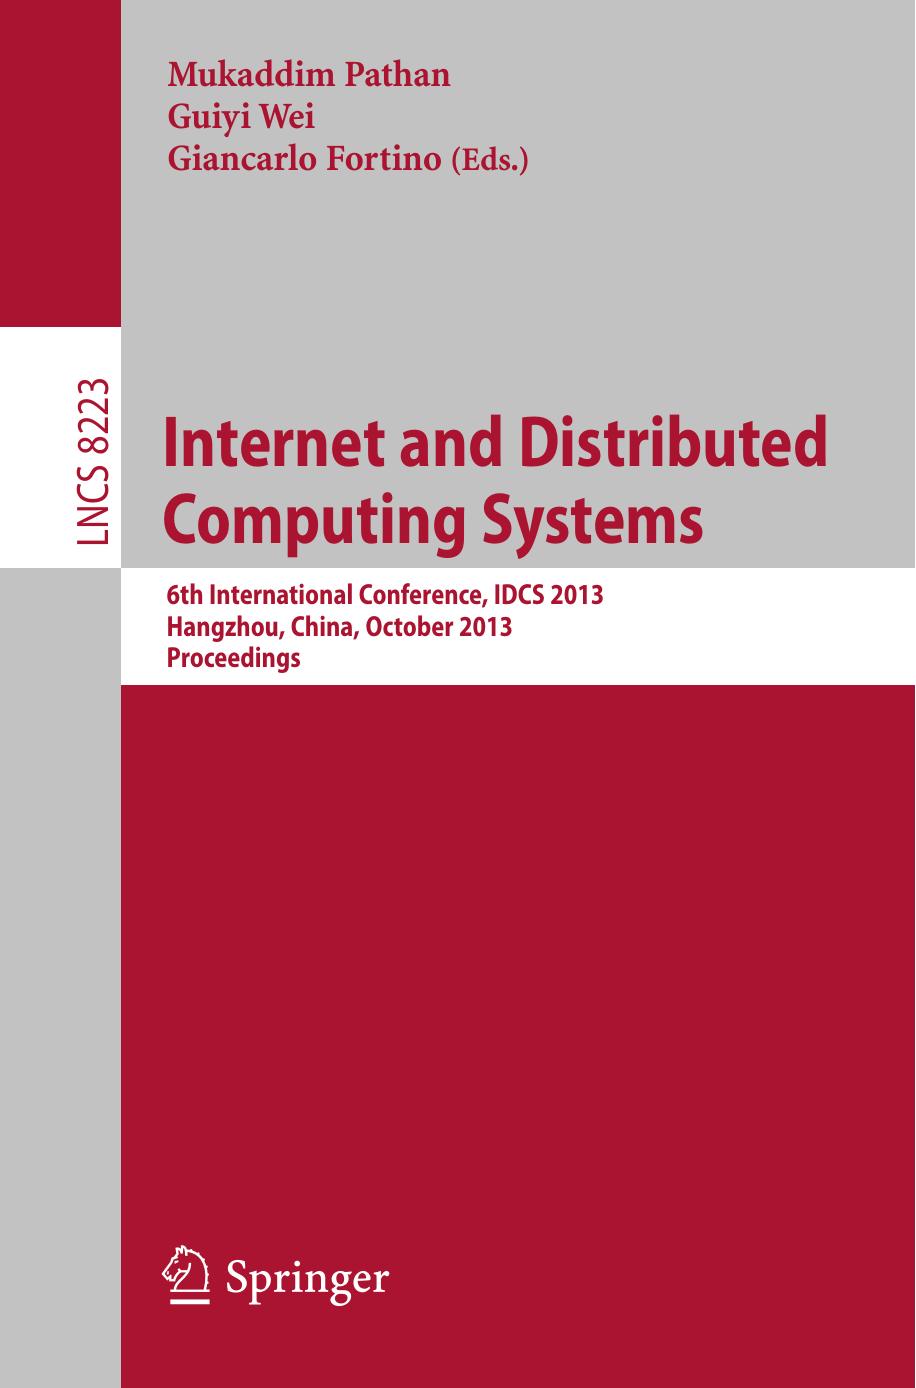 Internet and Distributed Computing Systems: 6th International Conference, IDCS 2013, Hangzhou, China, October 28-30, 2013, Proceedings